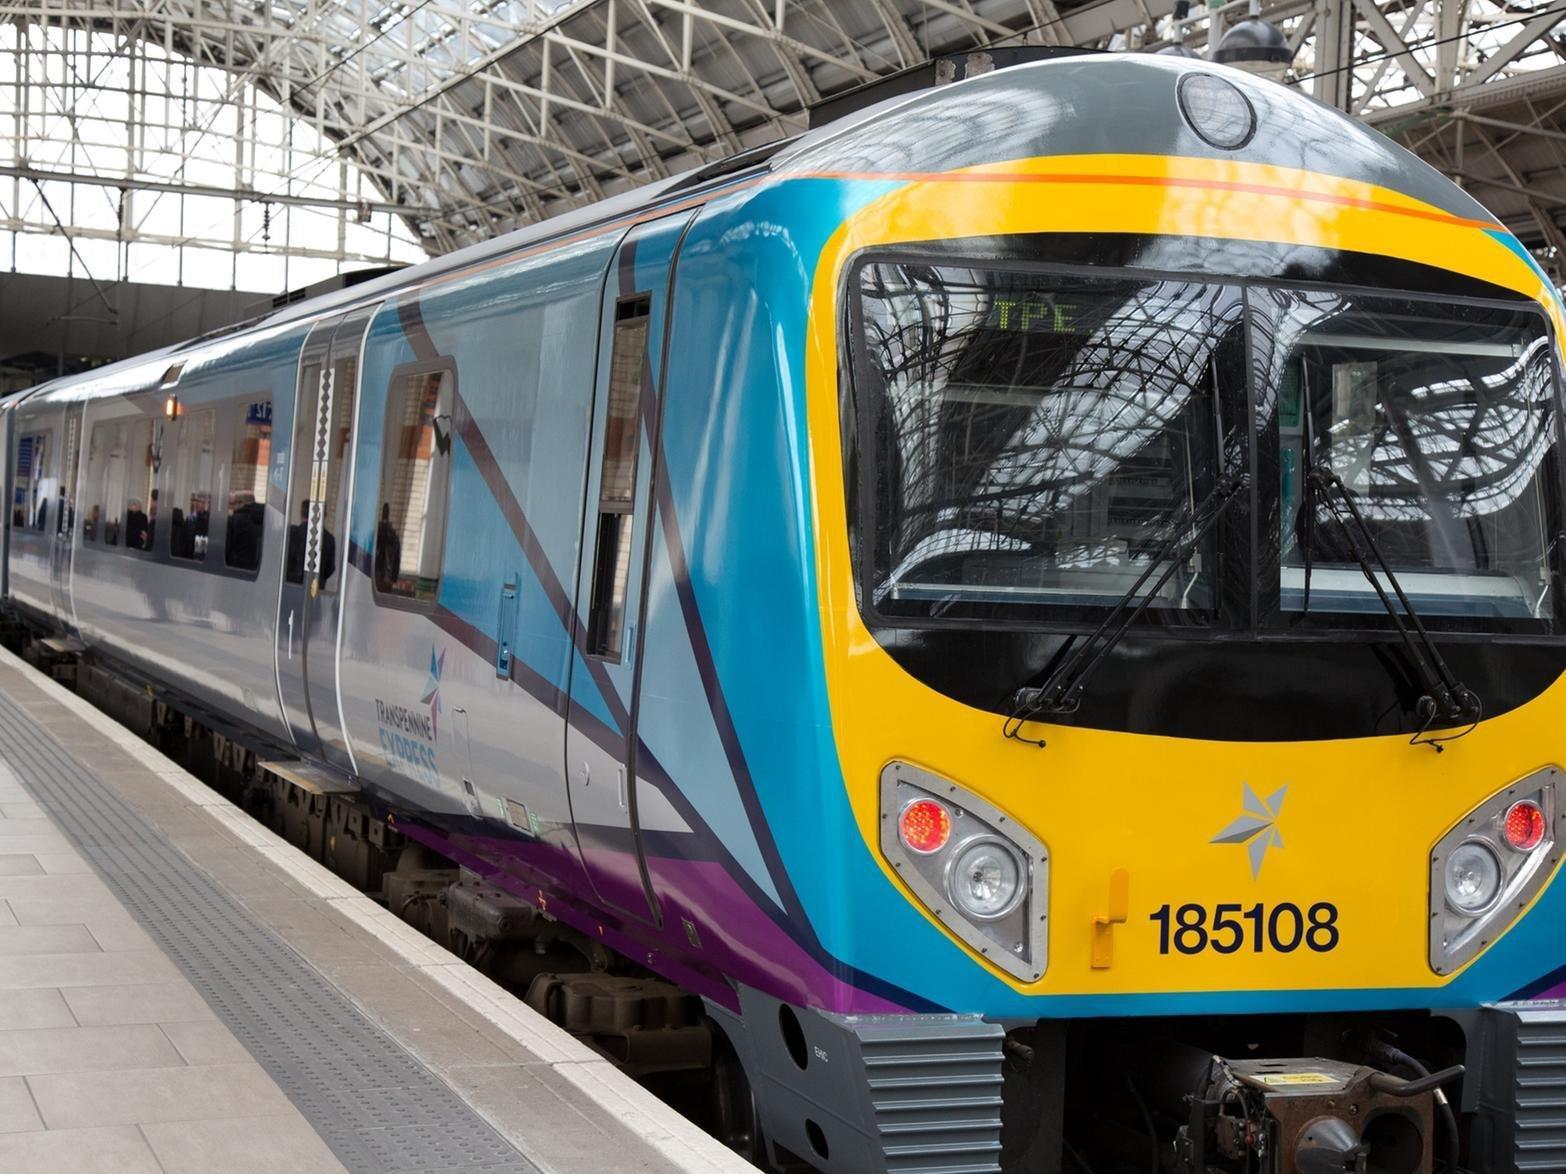 TransPennine Express rail strike: ‘very limited’ train services for Easter weekend and more dates announced